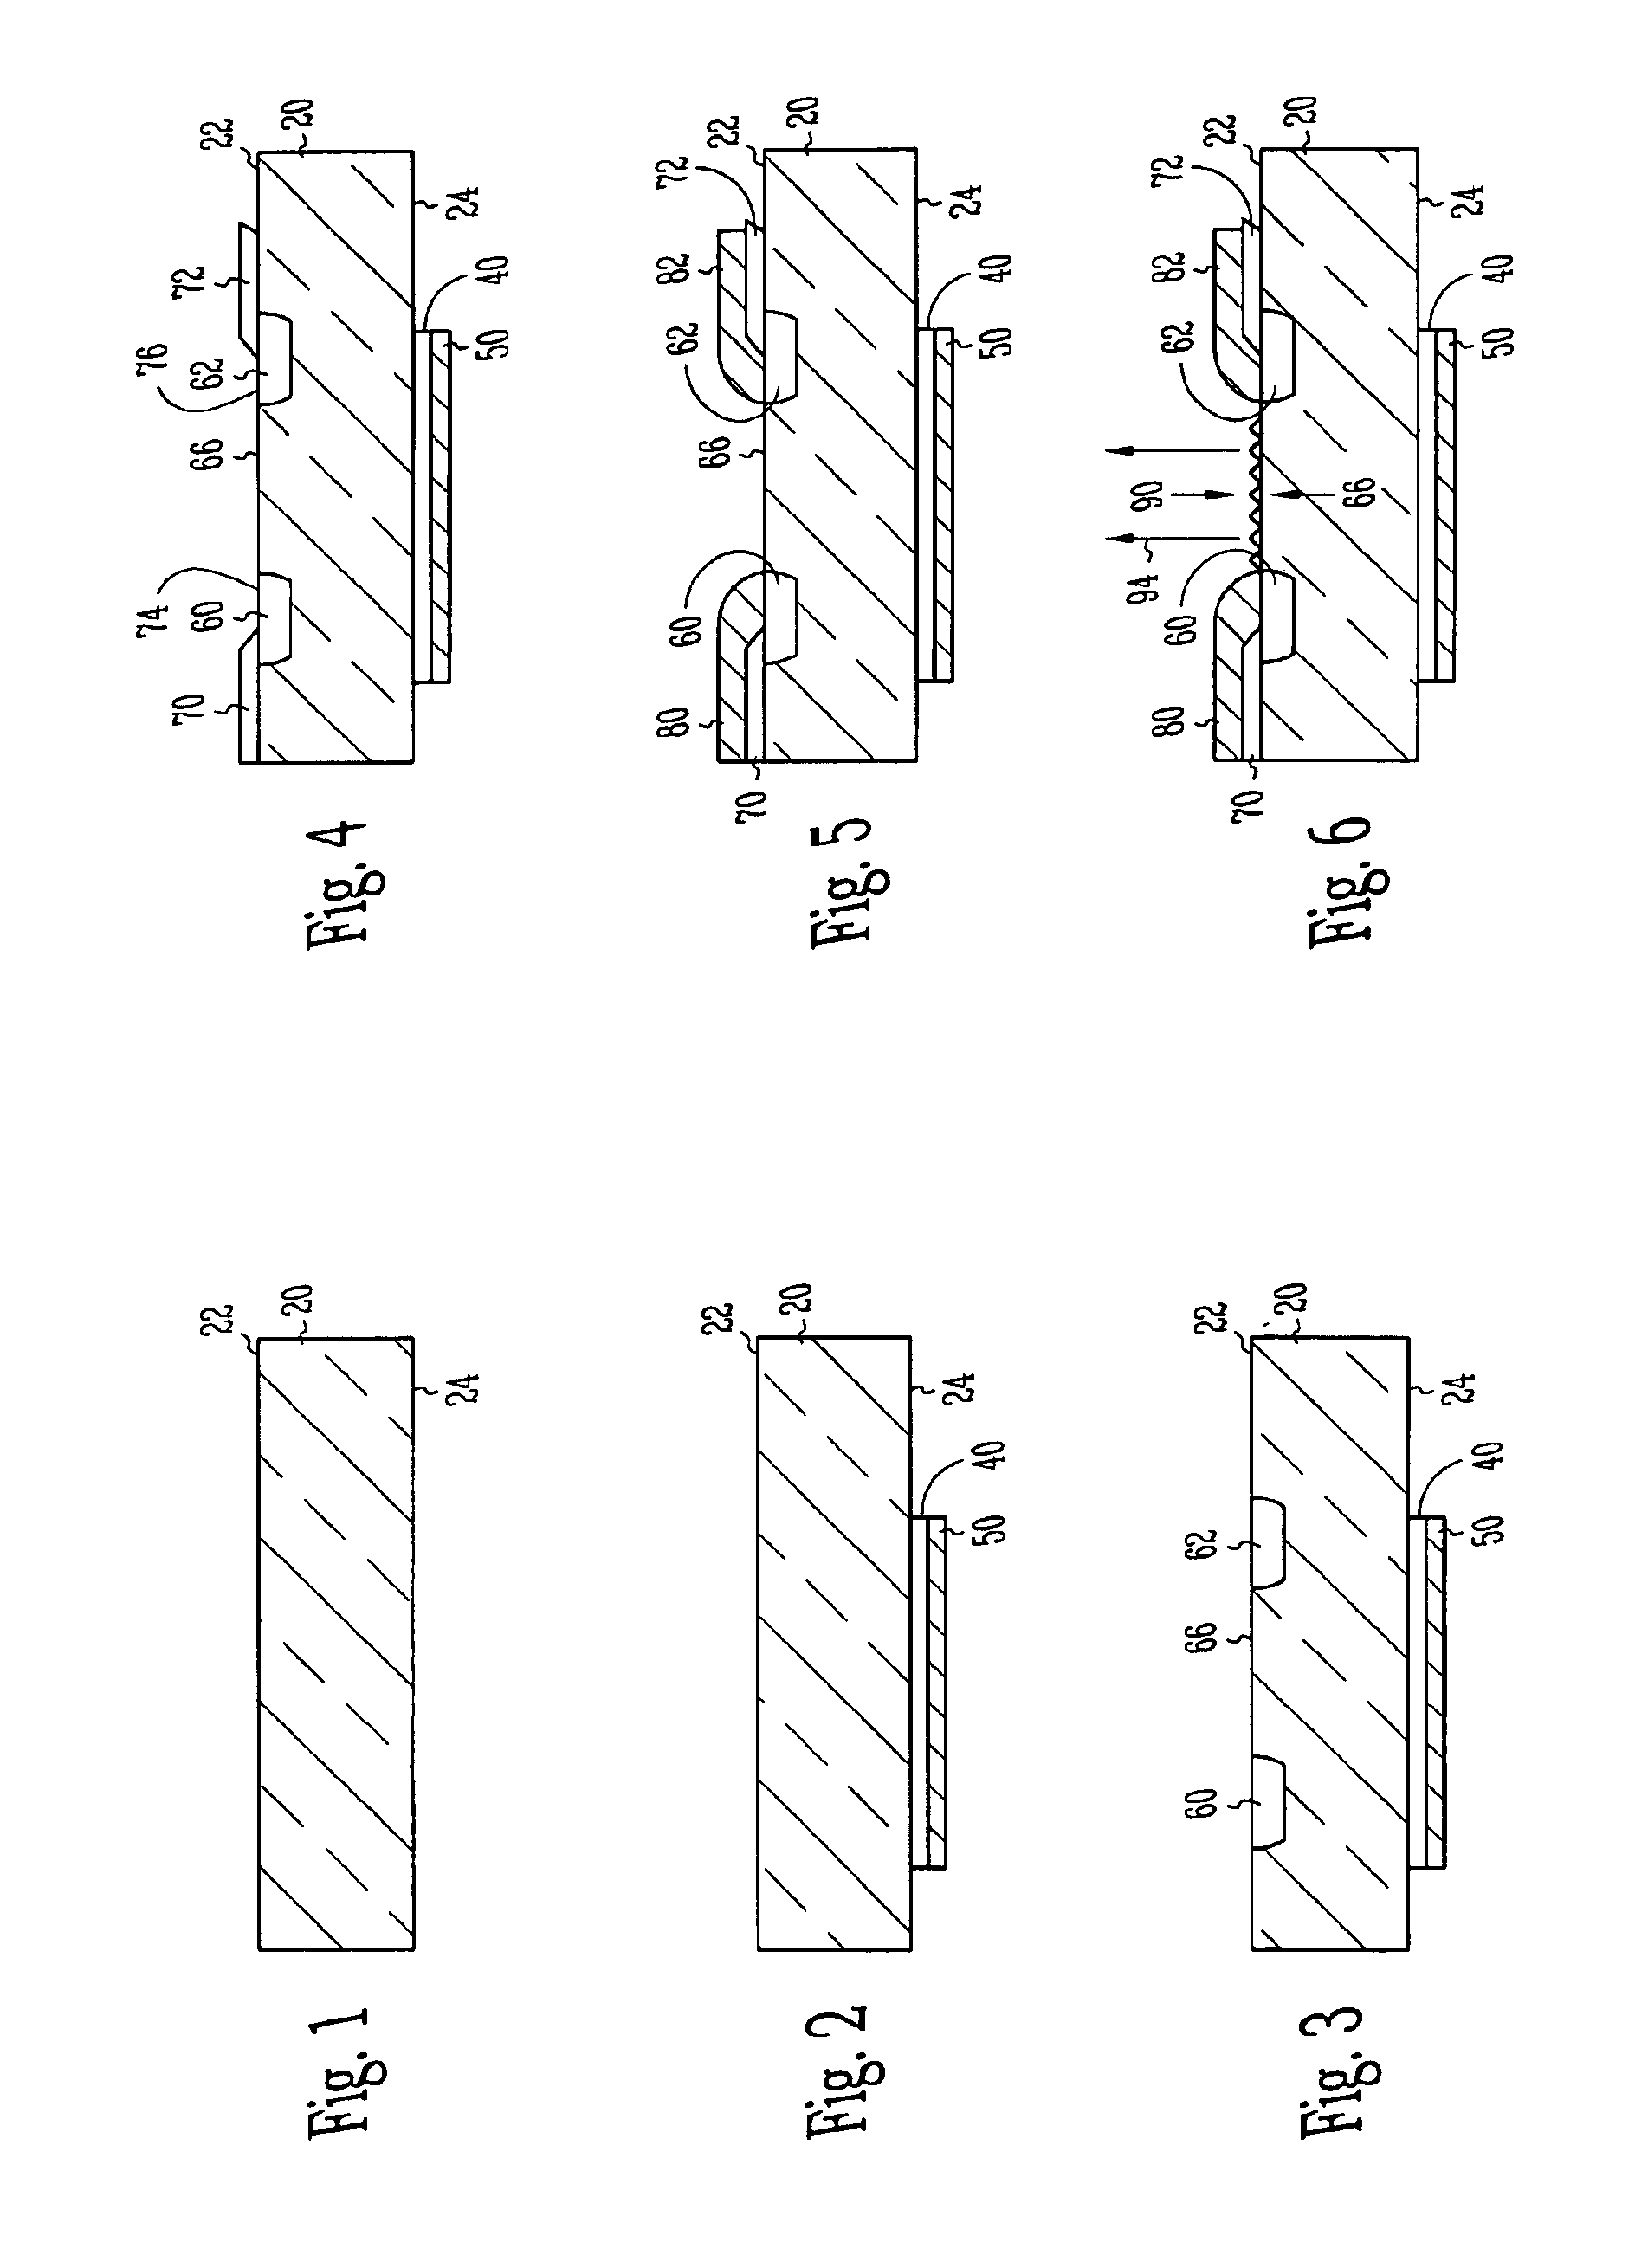 Silicon and silicon/germanium light-emitting device, methods and systems